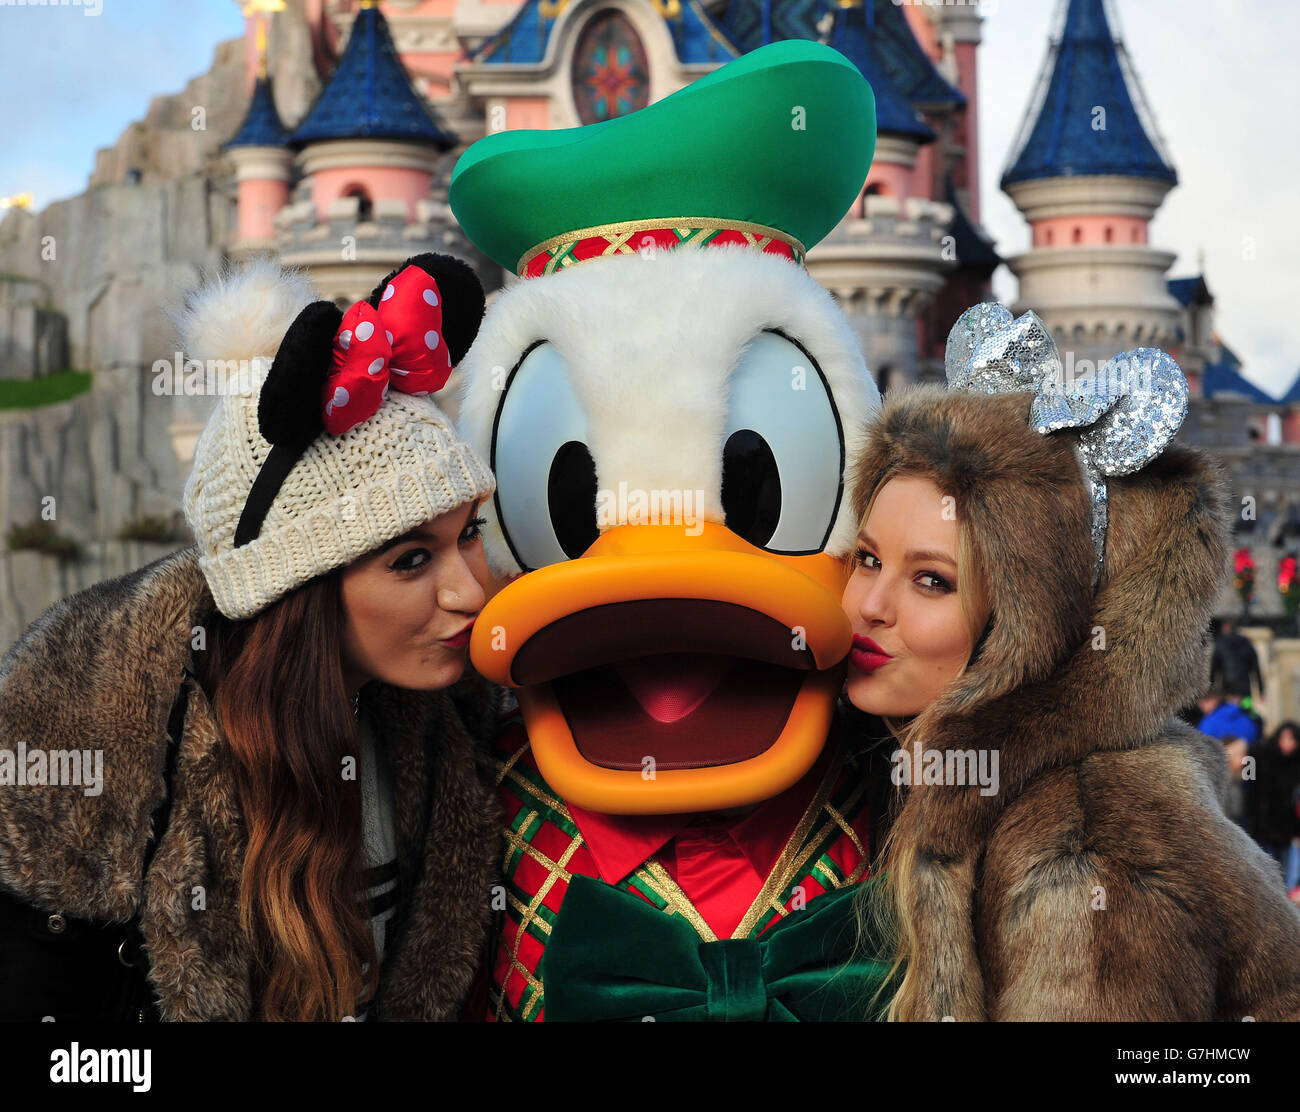 Parisa Tarjomani (left) and Betsey-Blue English of Only the Young, with Donald Duck during the charity trip to Disneyland Paris for under privileged children. PRESS ASSOCIATION Photo. Picture date: Tuesday December 16, 2014. Photo credit should read: Nick Ansell/PA Wire Stock Photo